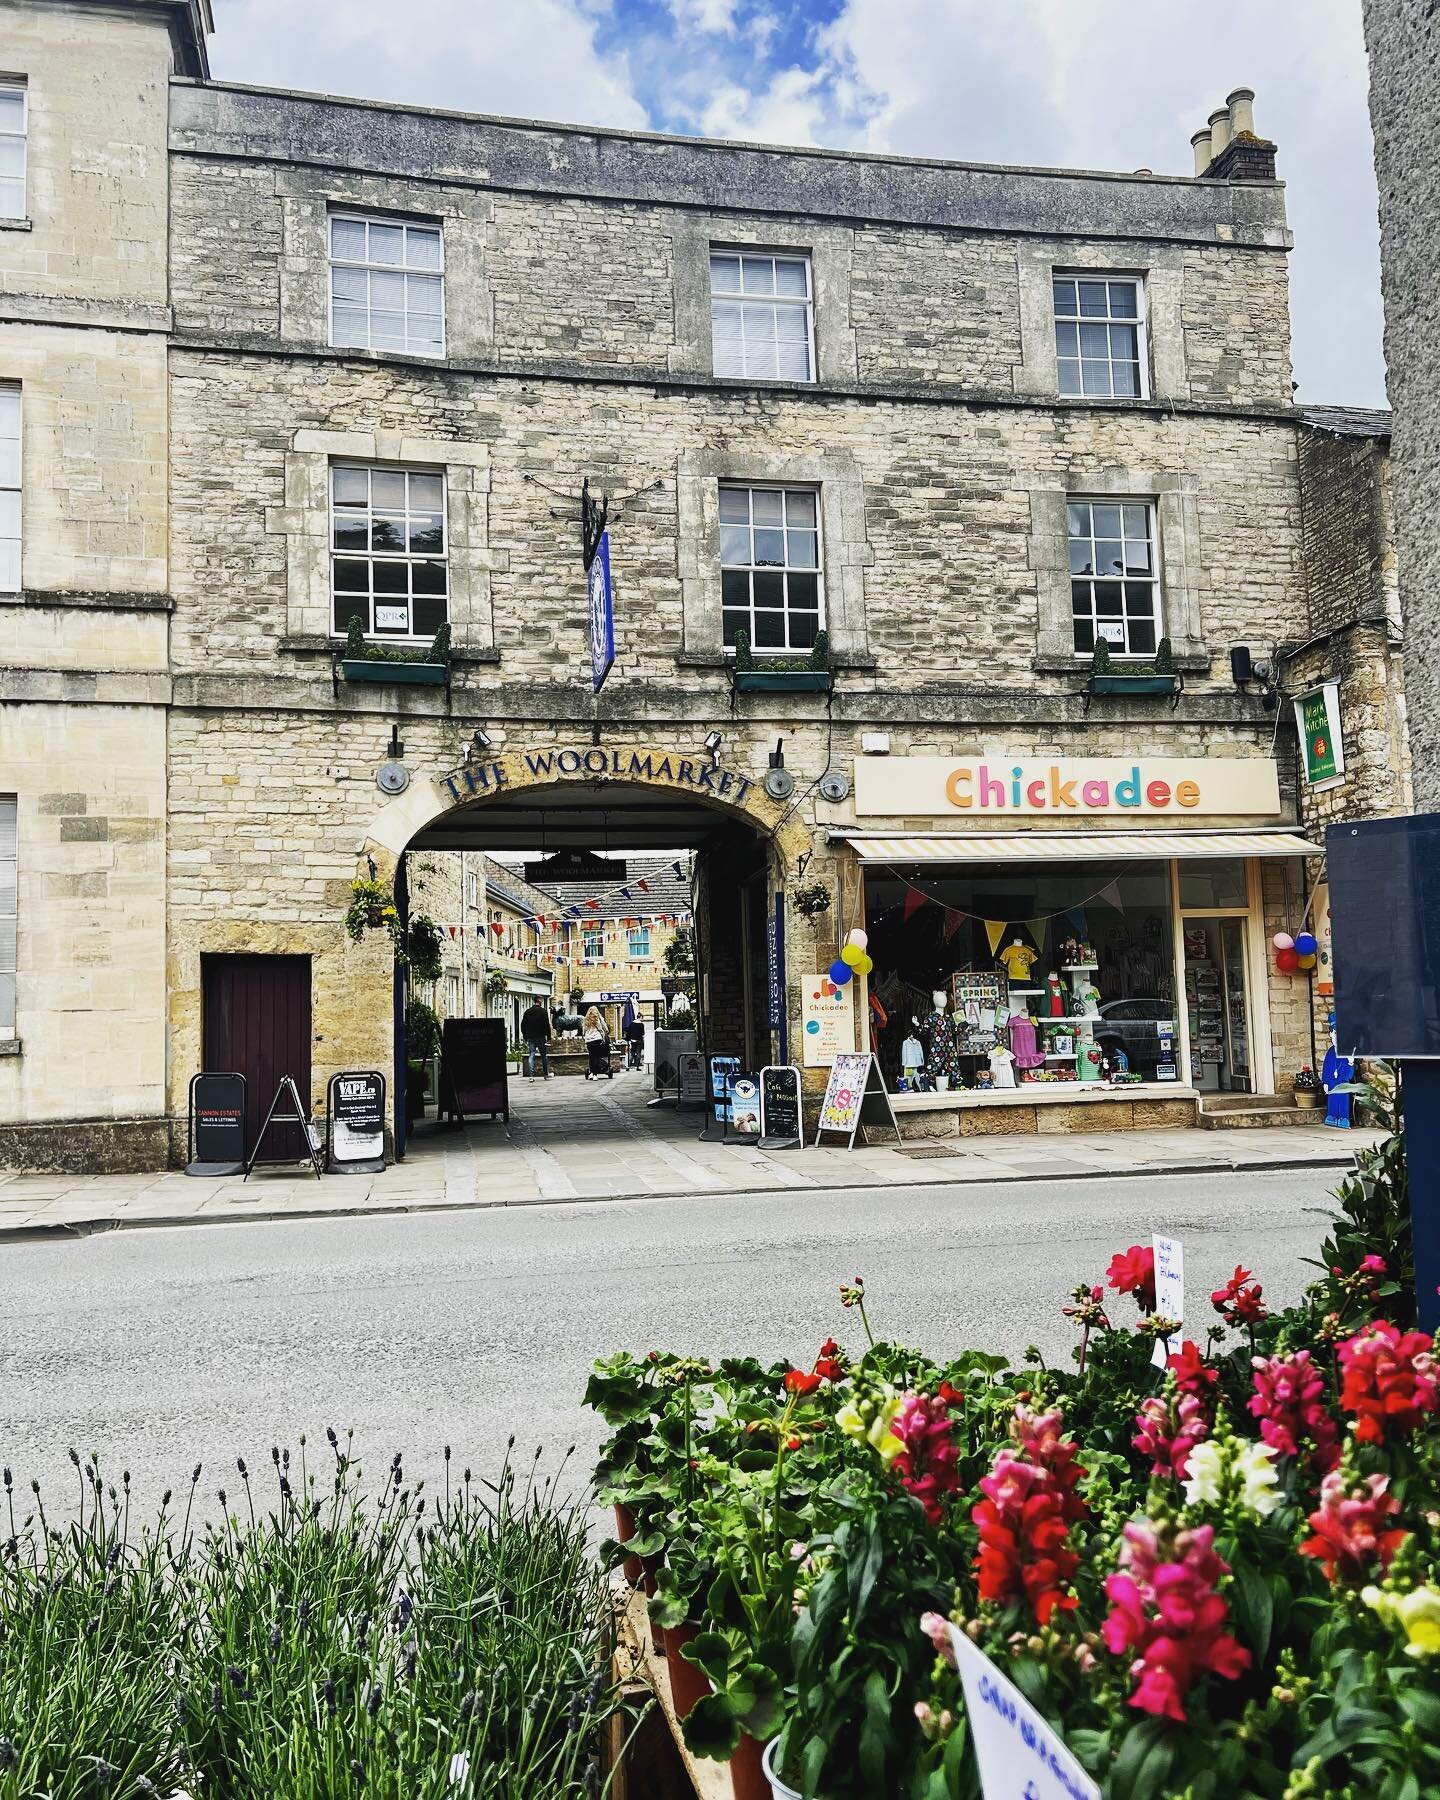 Our listed archway, looking lovely from Toomers flower display across the road. 💐💐💐💐💐💐. #cirencester #cirencestershopping #cotswolds